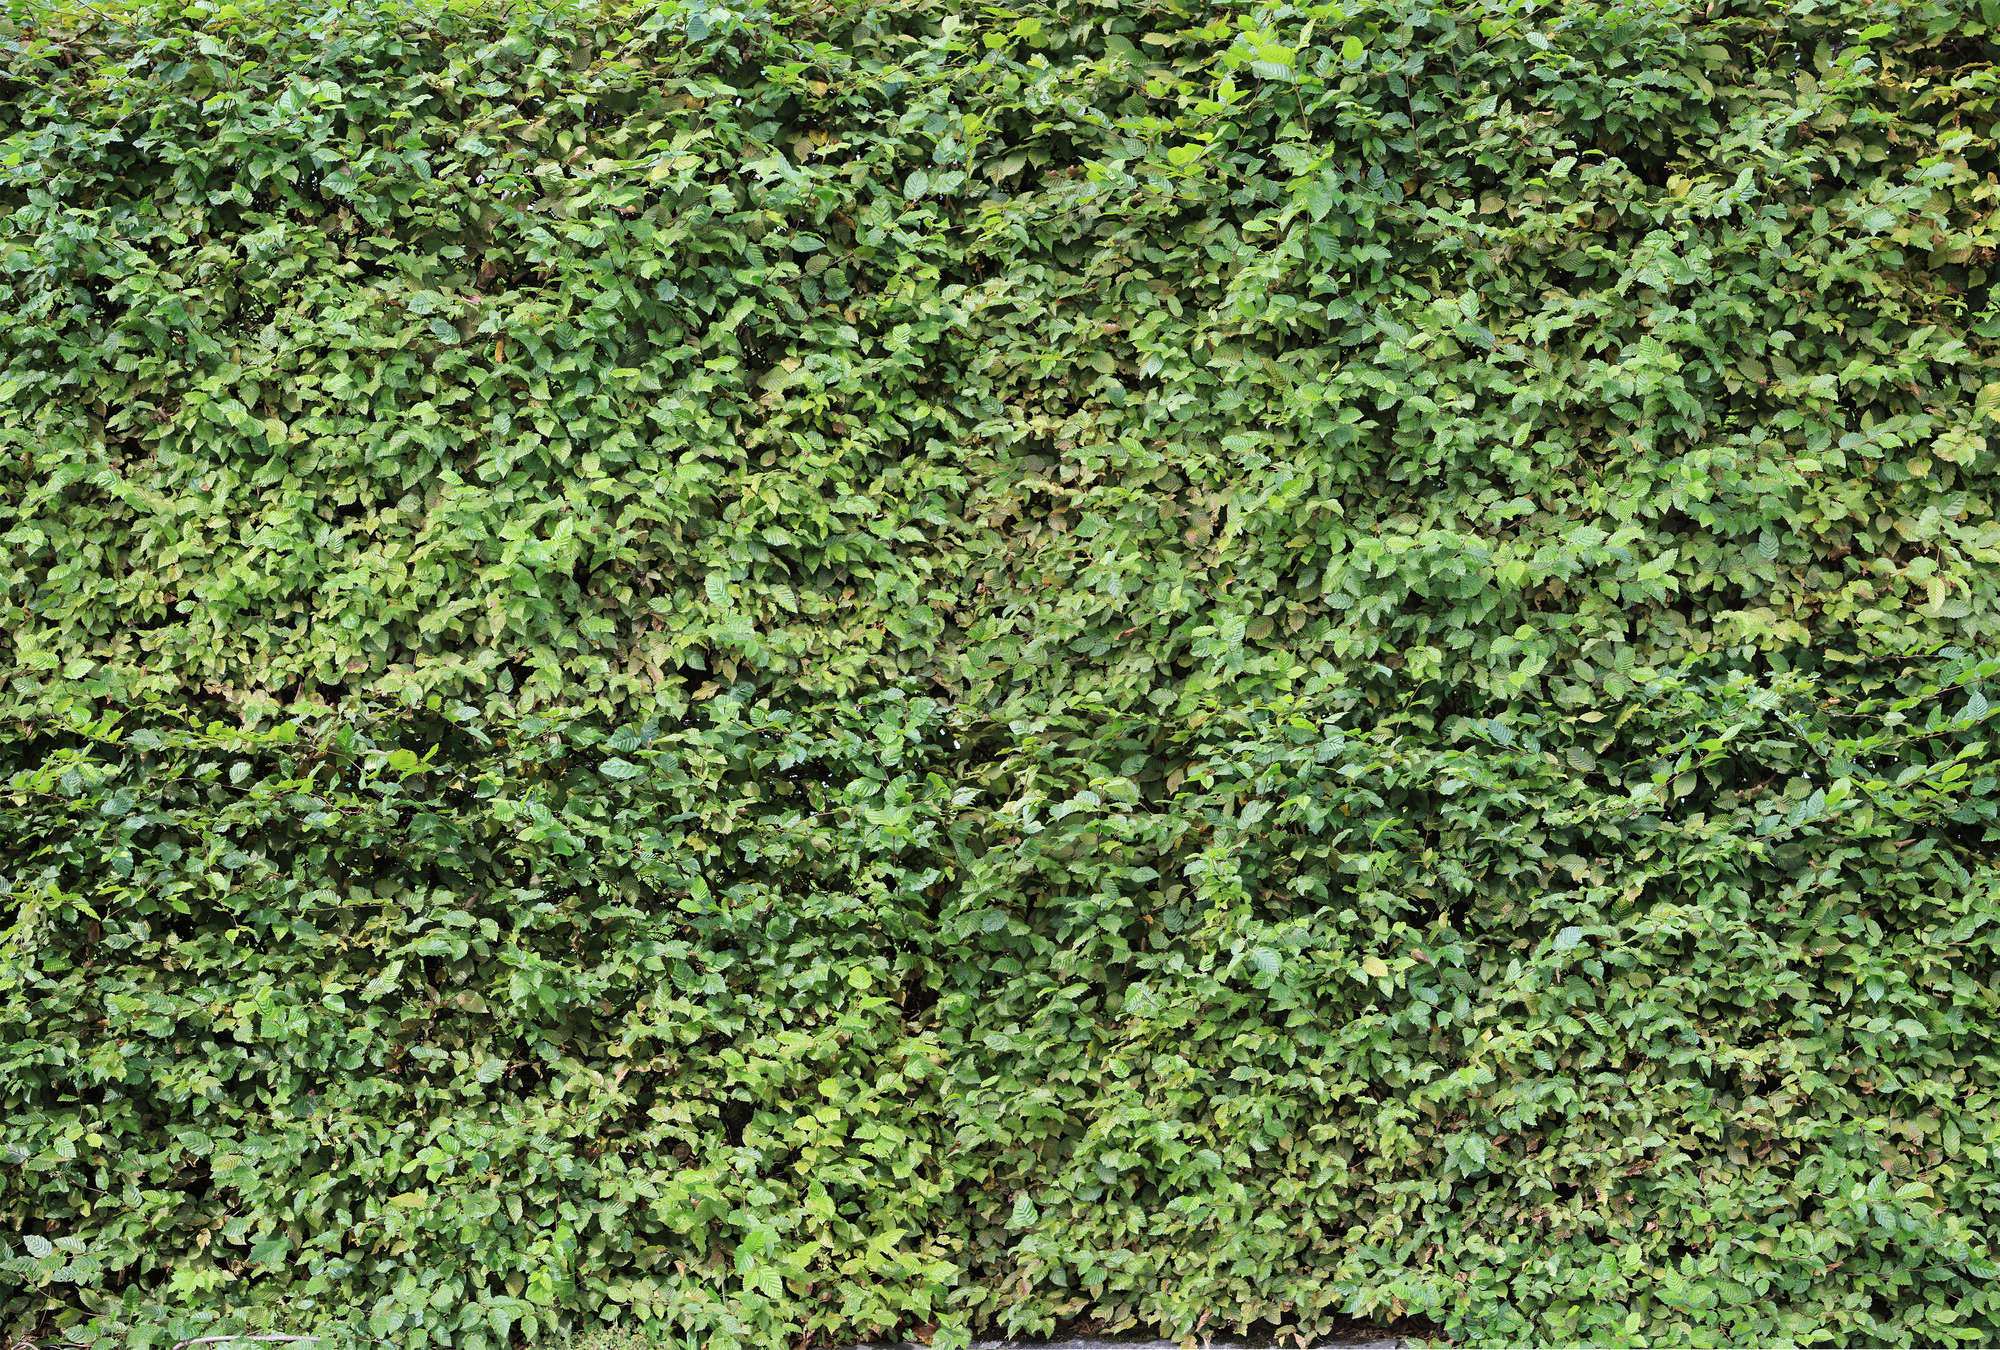             Green Hedge Leaves Thicket Wallpaper met 3D-effect
        